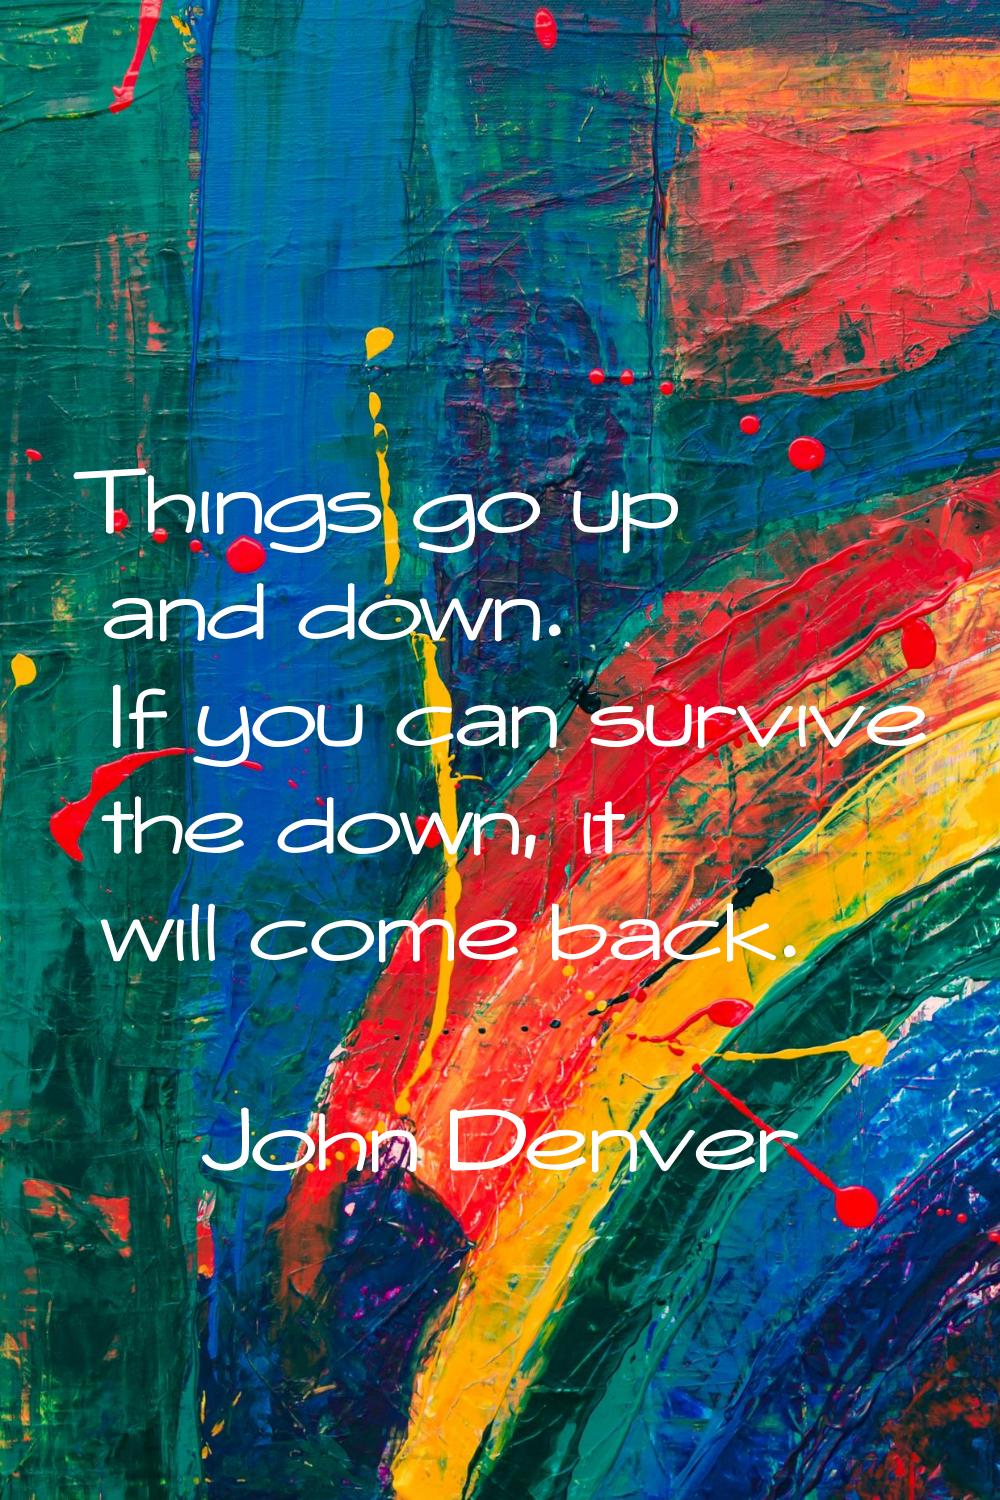 Things go up and down. If you can survive the down, it will come back.